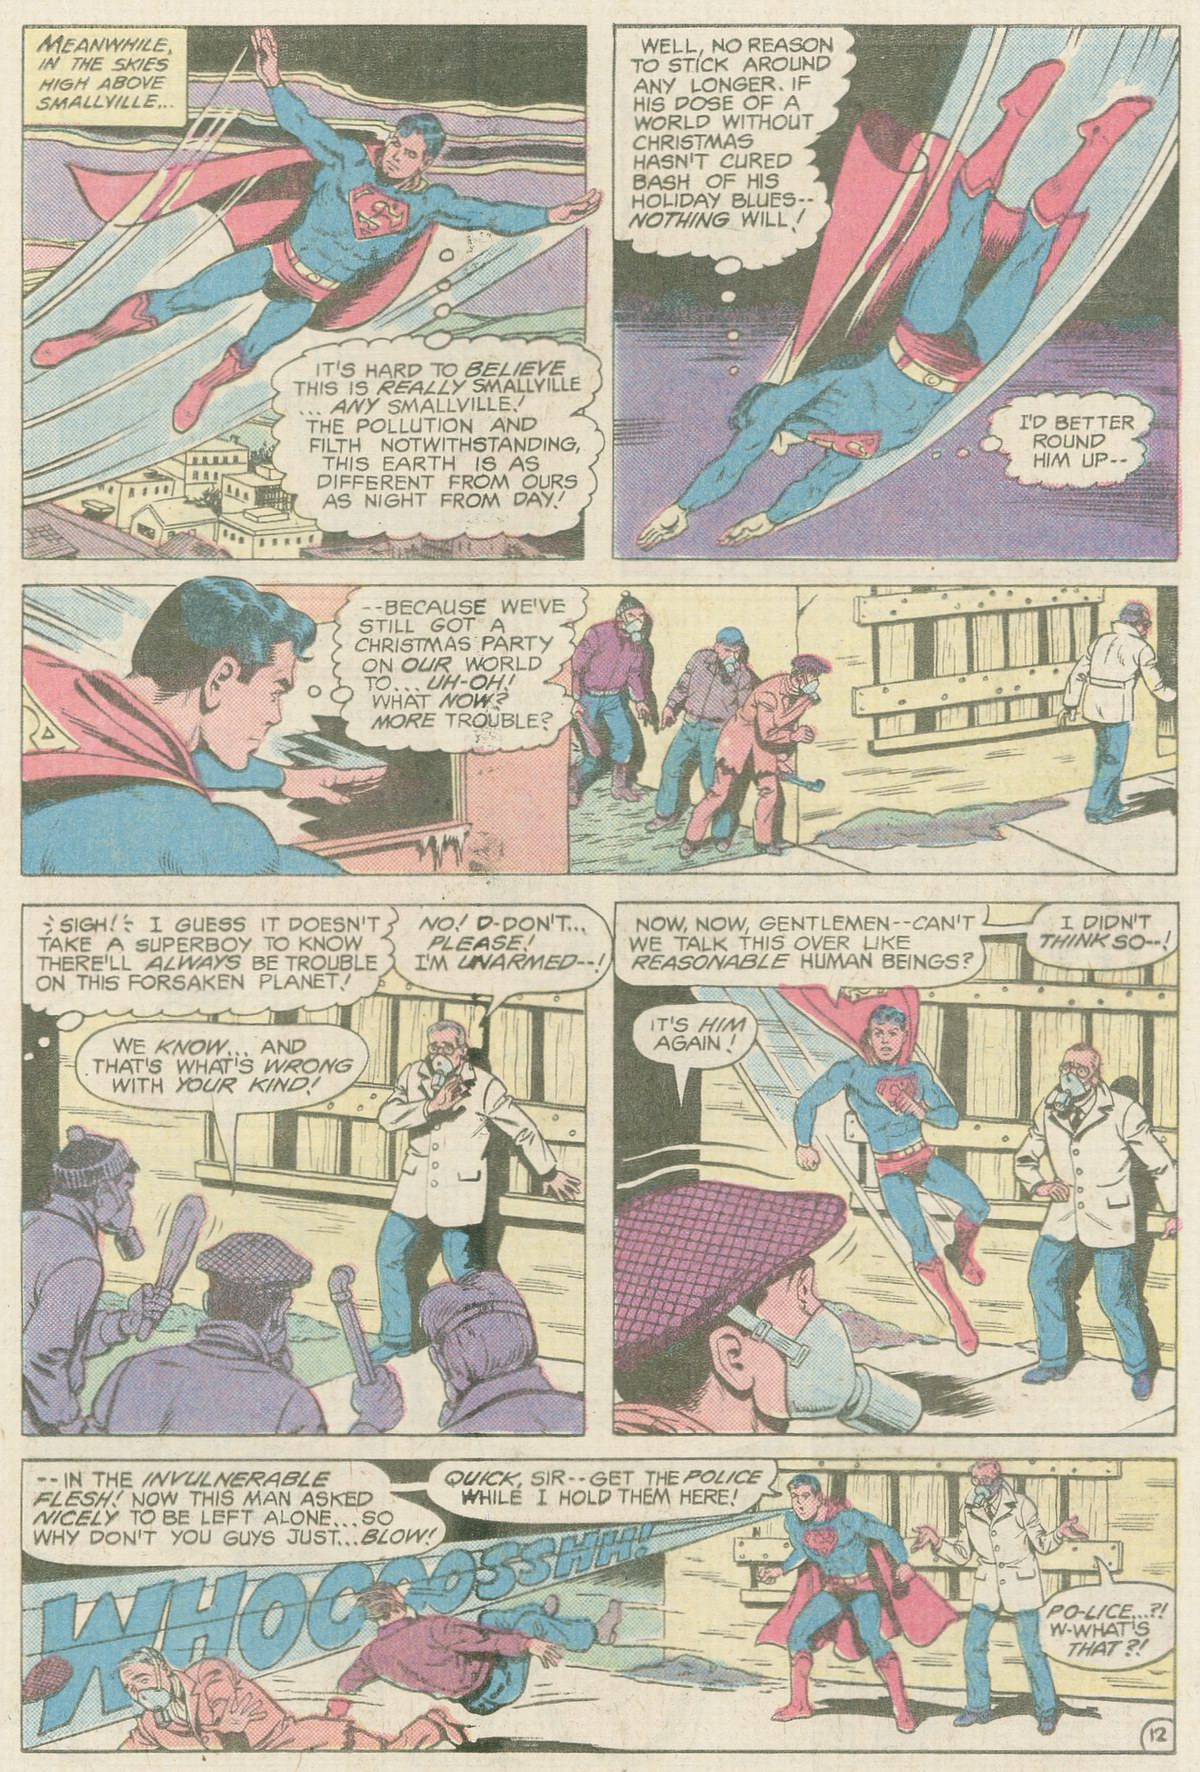 The New Adventures of Superboy 39 Page 12